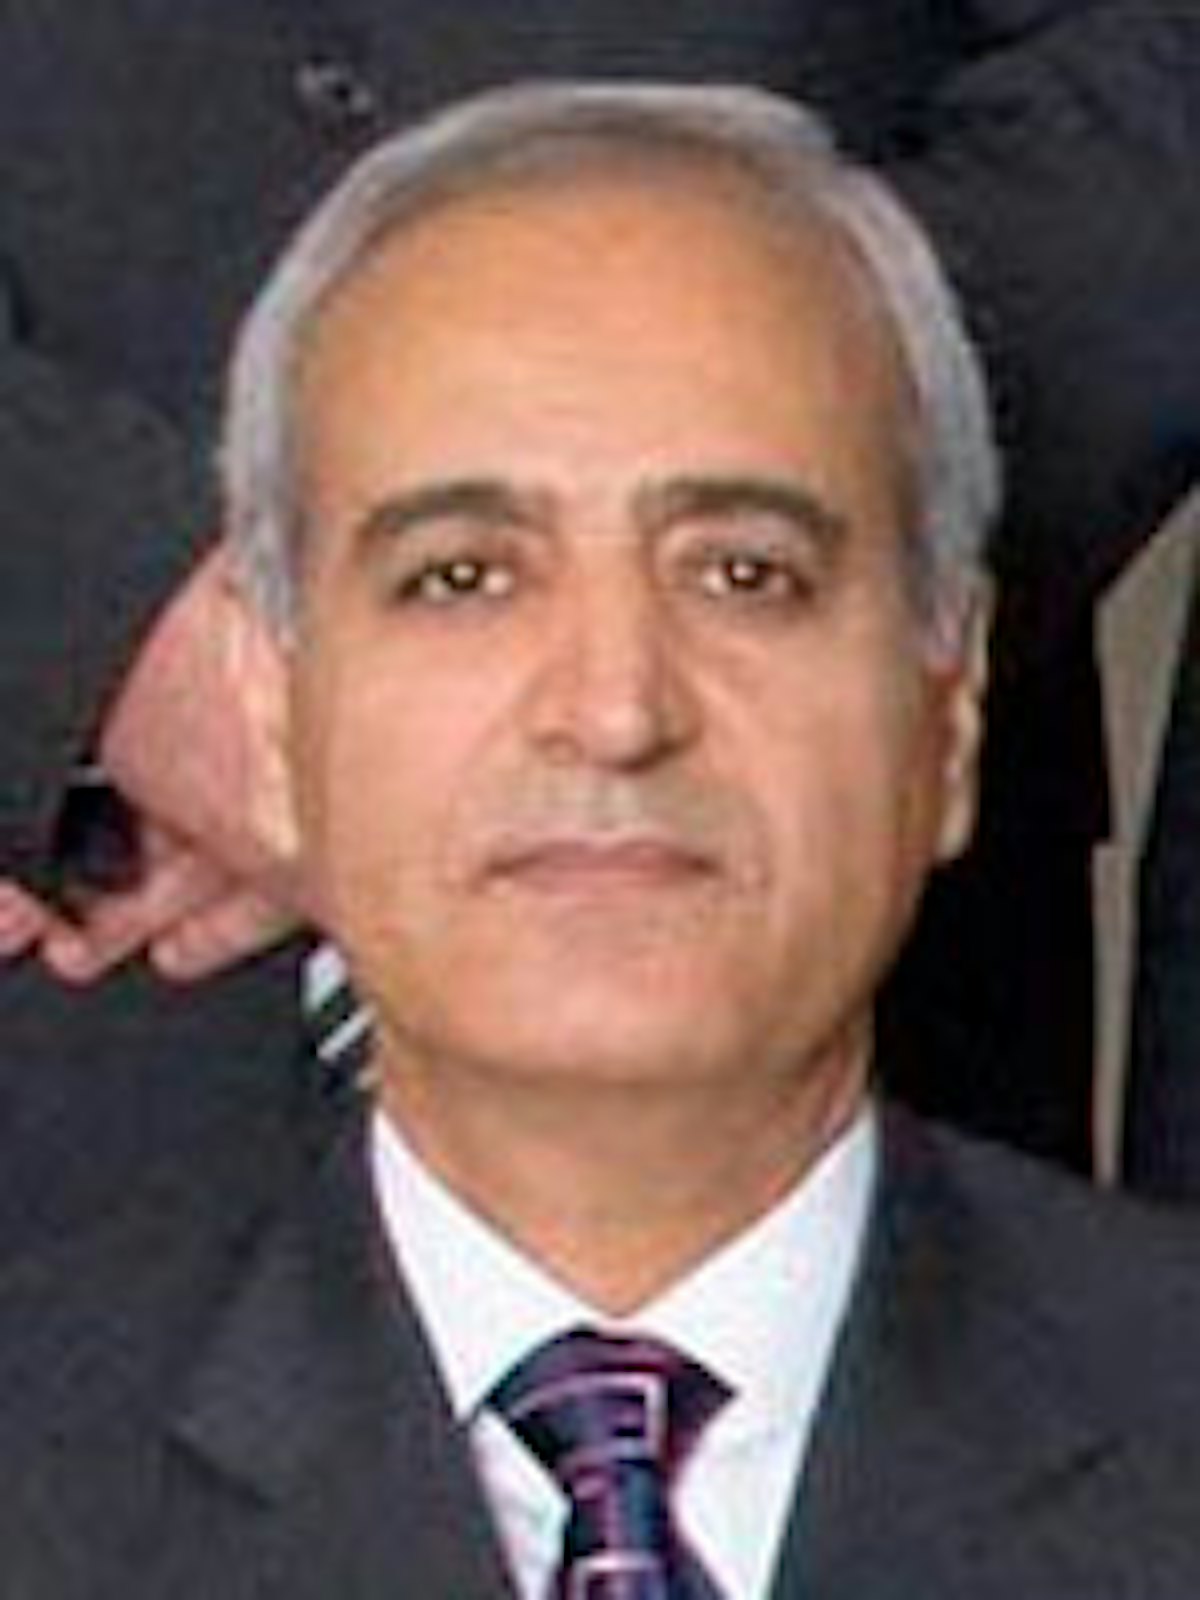 Behrouz Tavakkoli, one of Iran's seven imprisoned Baha'i leaders and Valiollah Toosky's brother-in-law, currently serving a 20-year jail sentence. Mr. Toosky had taught Mr. Tavakkoli carpentry skills after he was fired from his job as a government social worker for being a Baha'i.